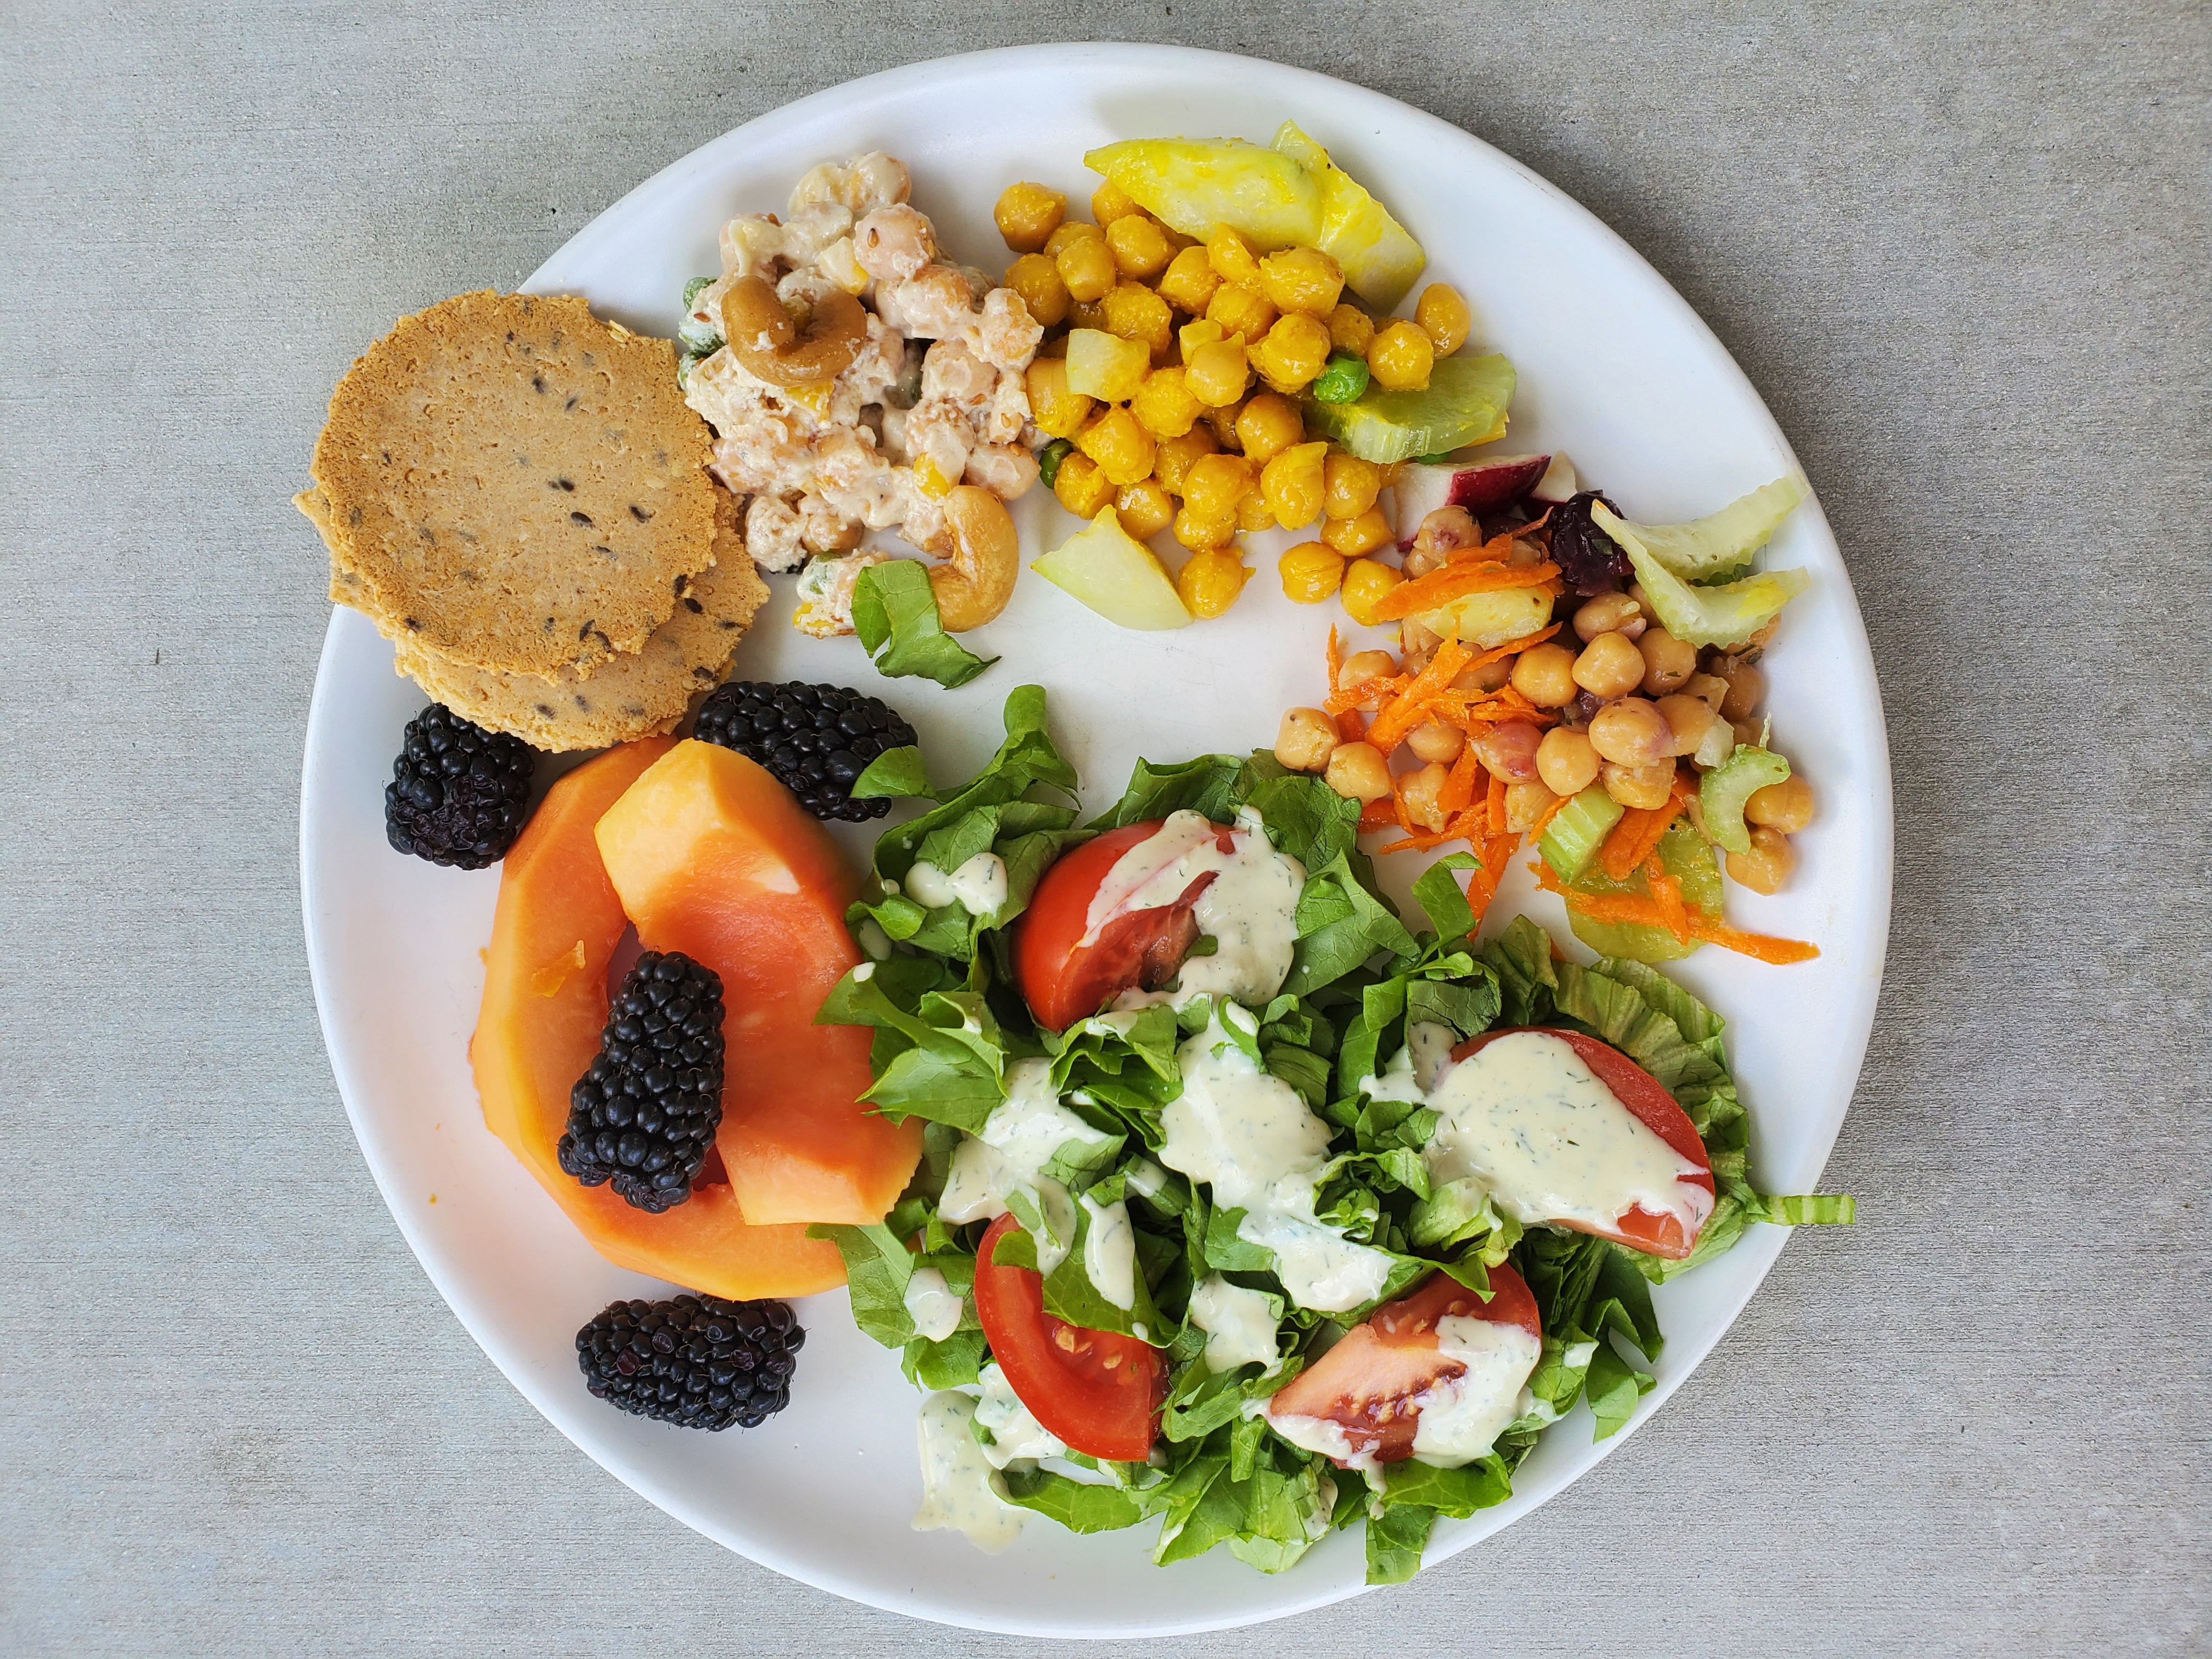 Plate of chickpea salads, fruit, salad, and crackers